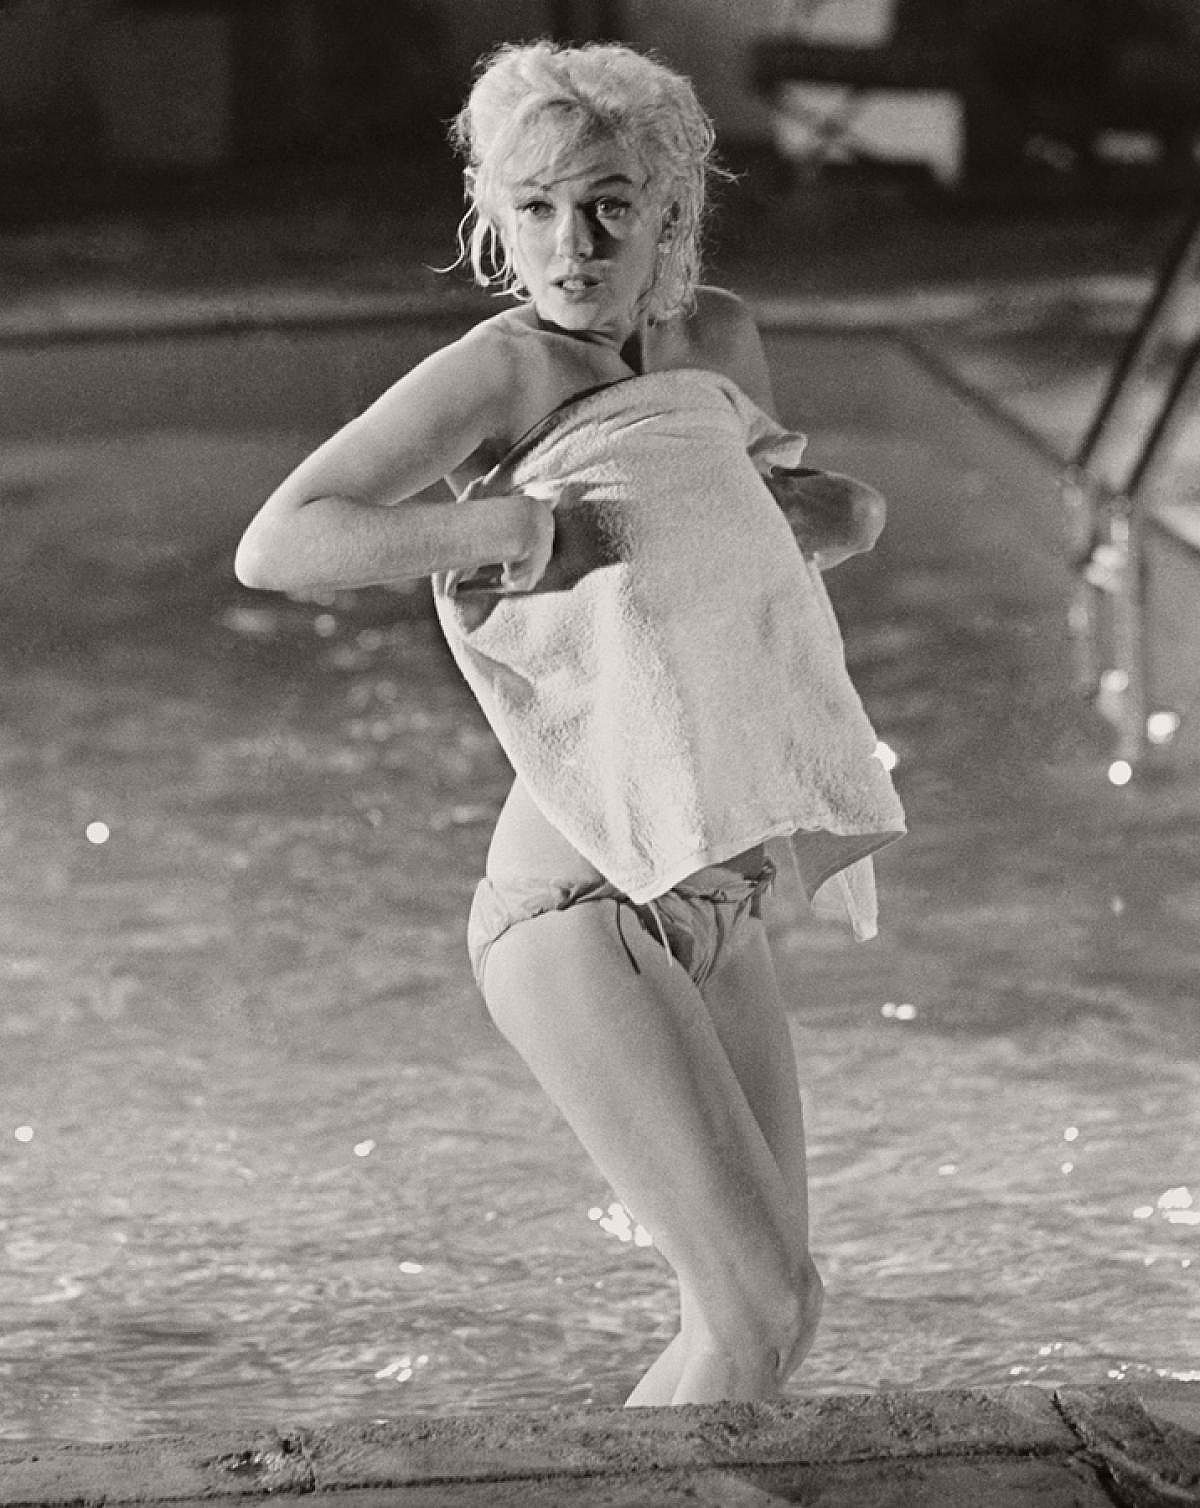 marilyn-monroe-in-the-pool-by-lawrence-schiller-1962-10